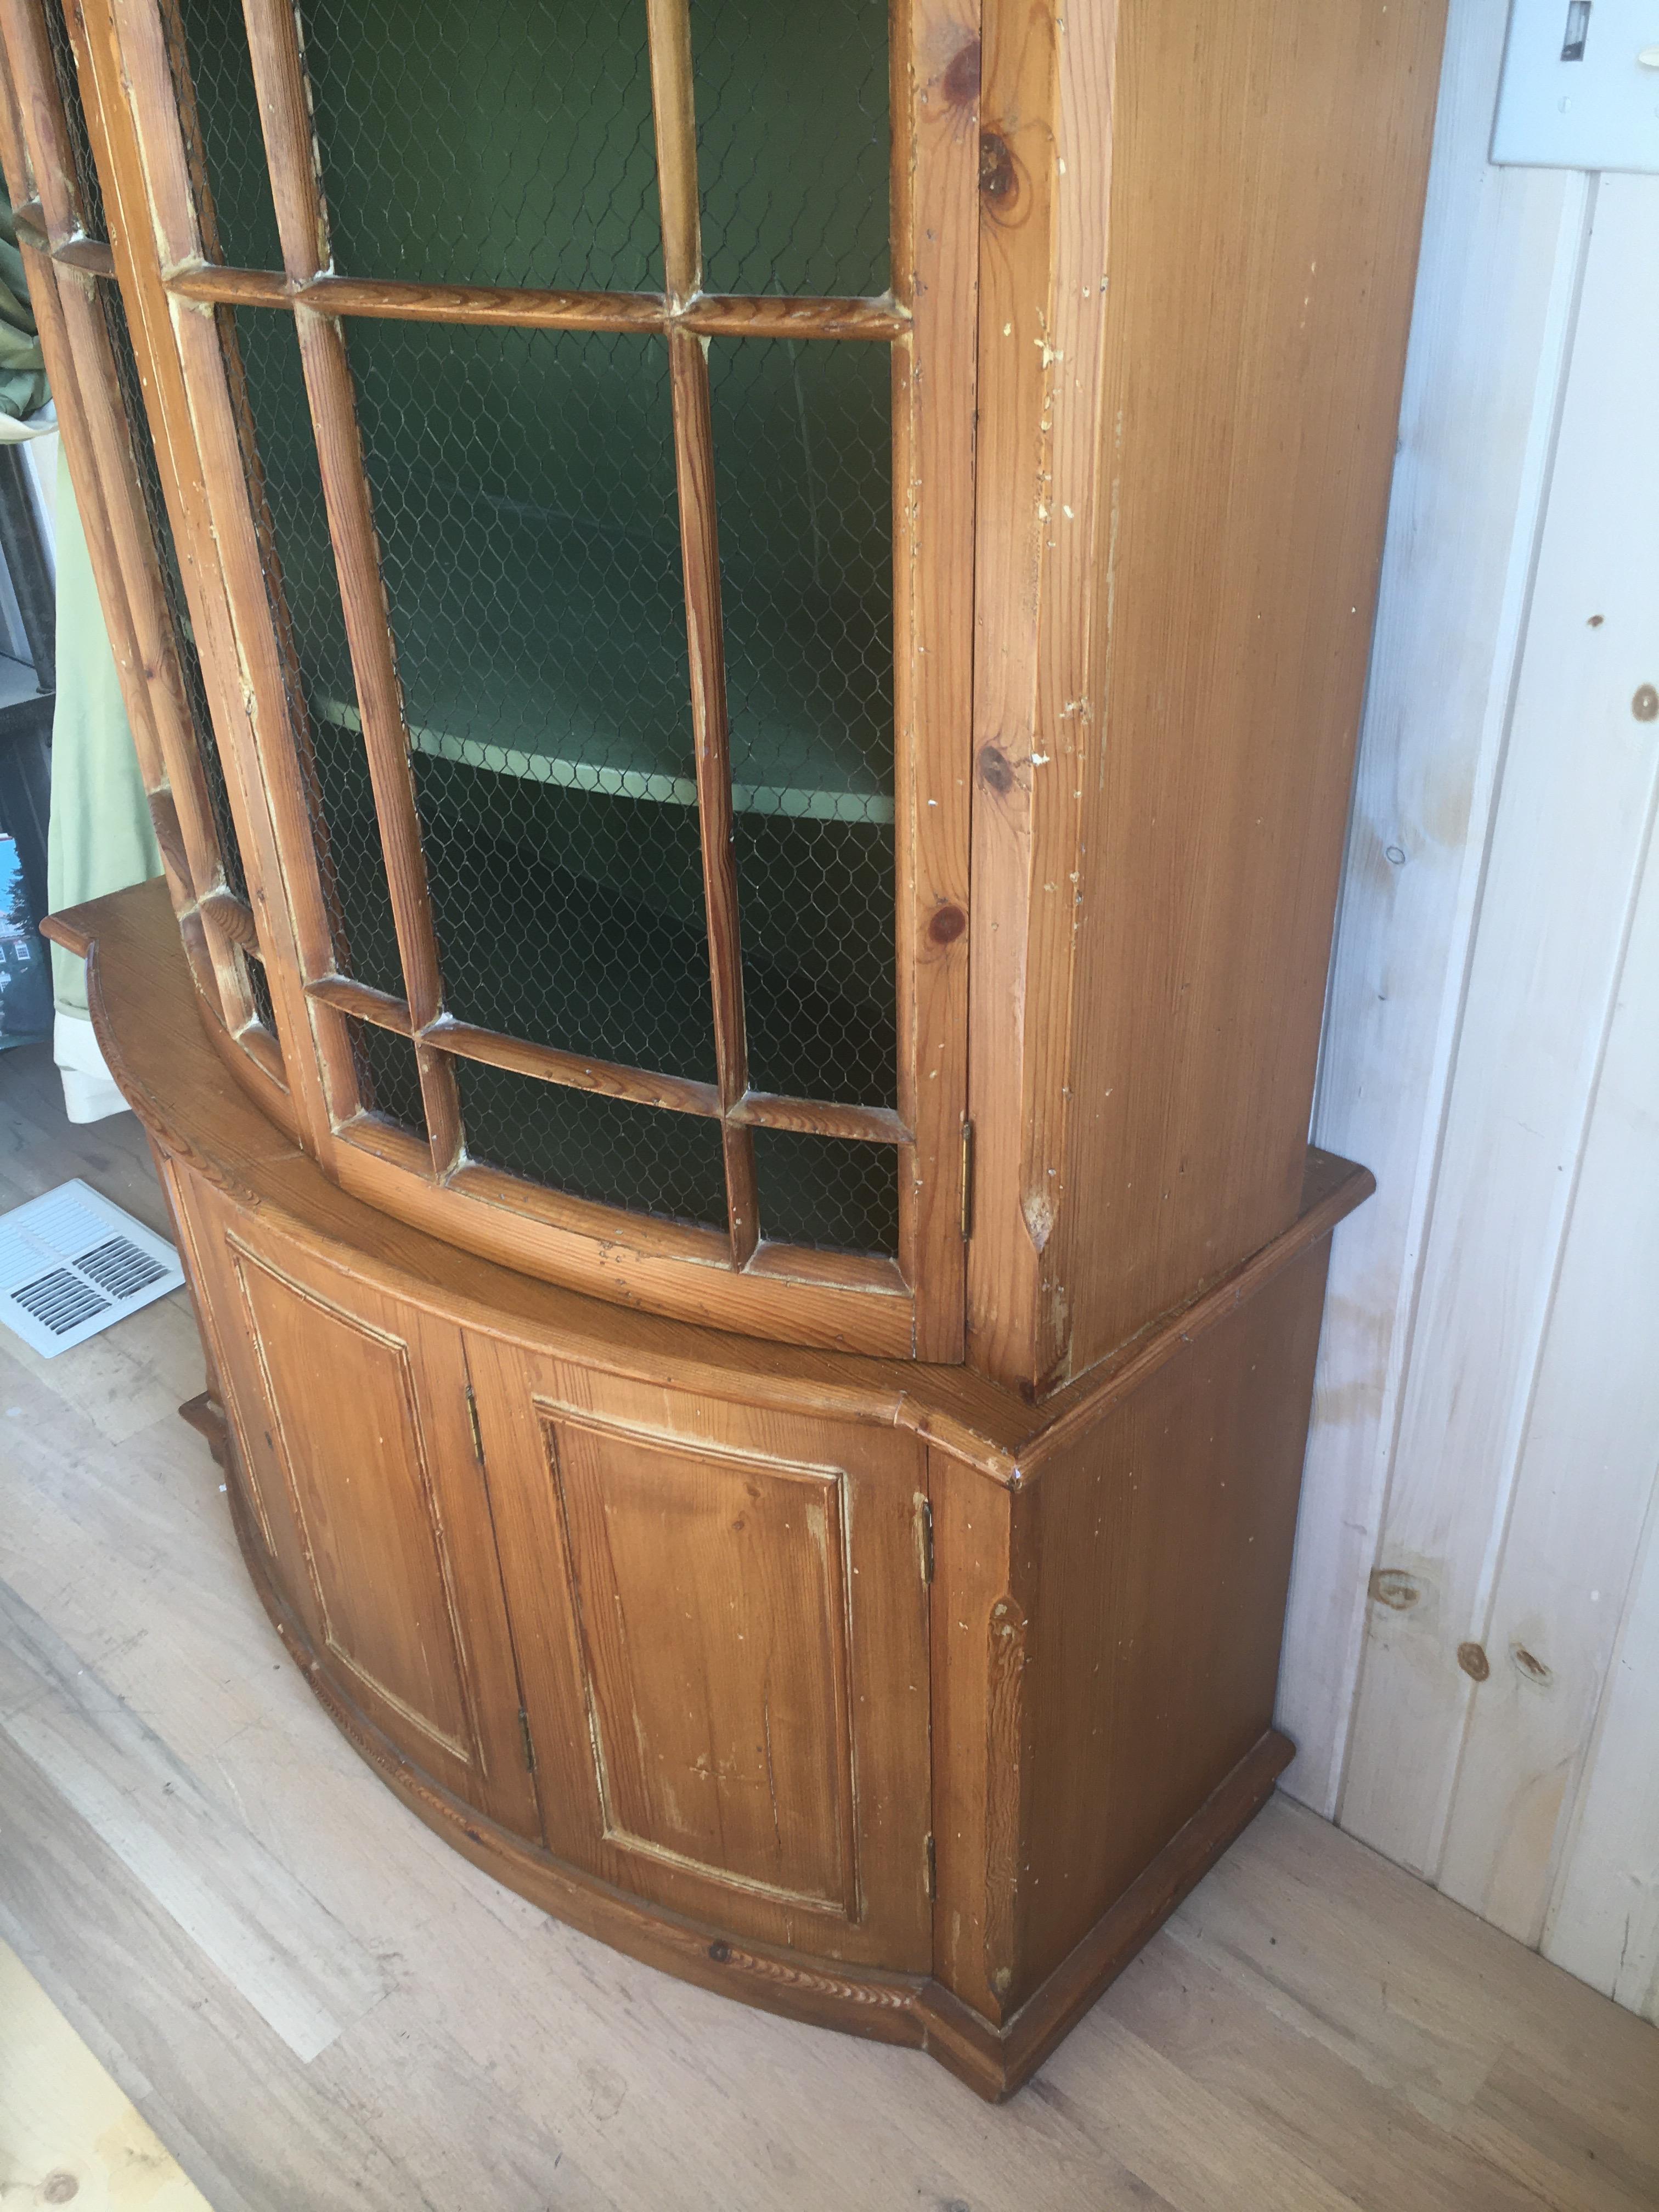 20th Century Handsome English Pine Two-Door Cabinet with Wire Mesh on Upper Doors Nice Patina